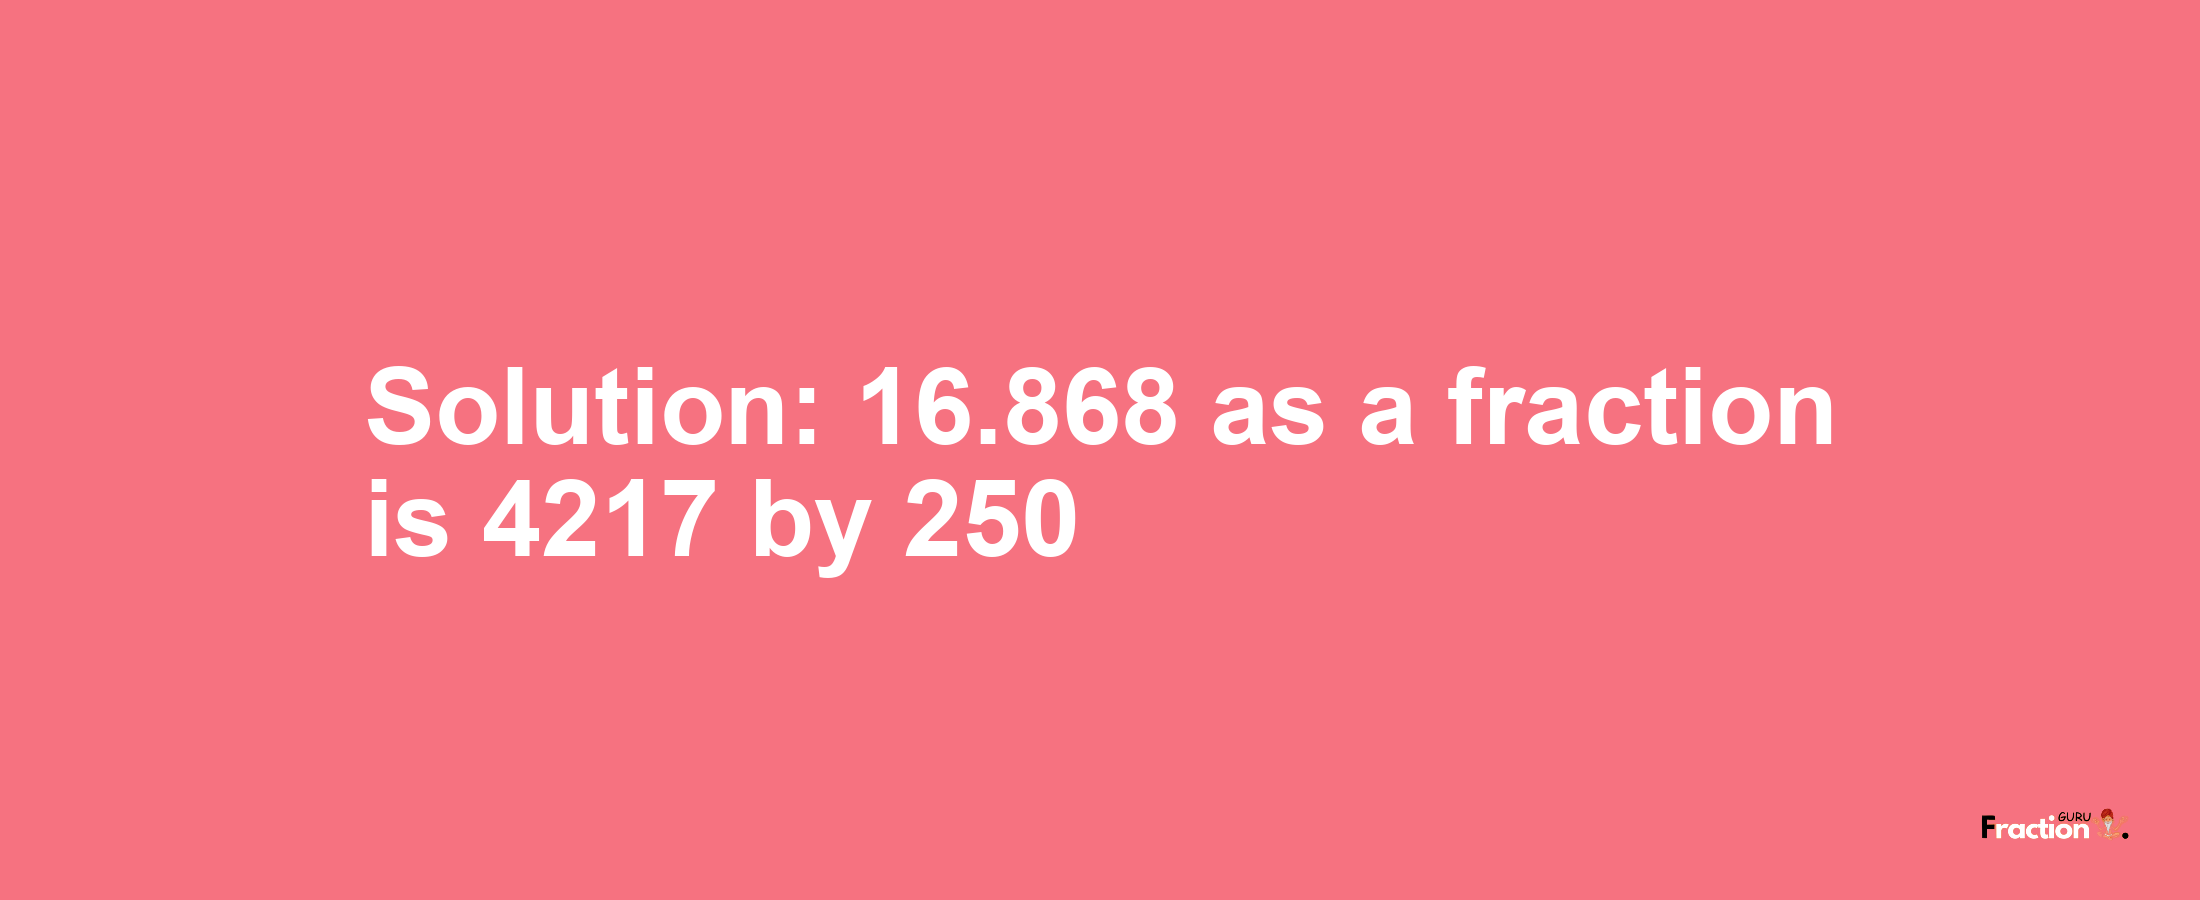 Solution:16.868 as a fraction is 4217/250